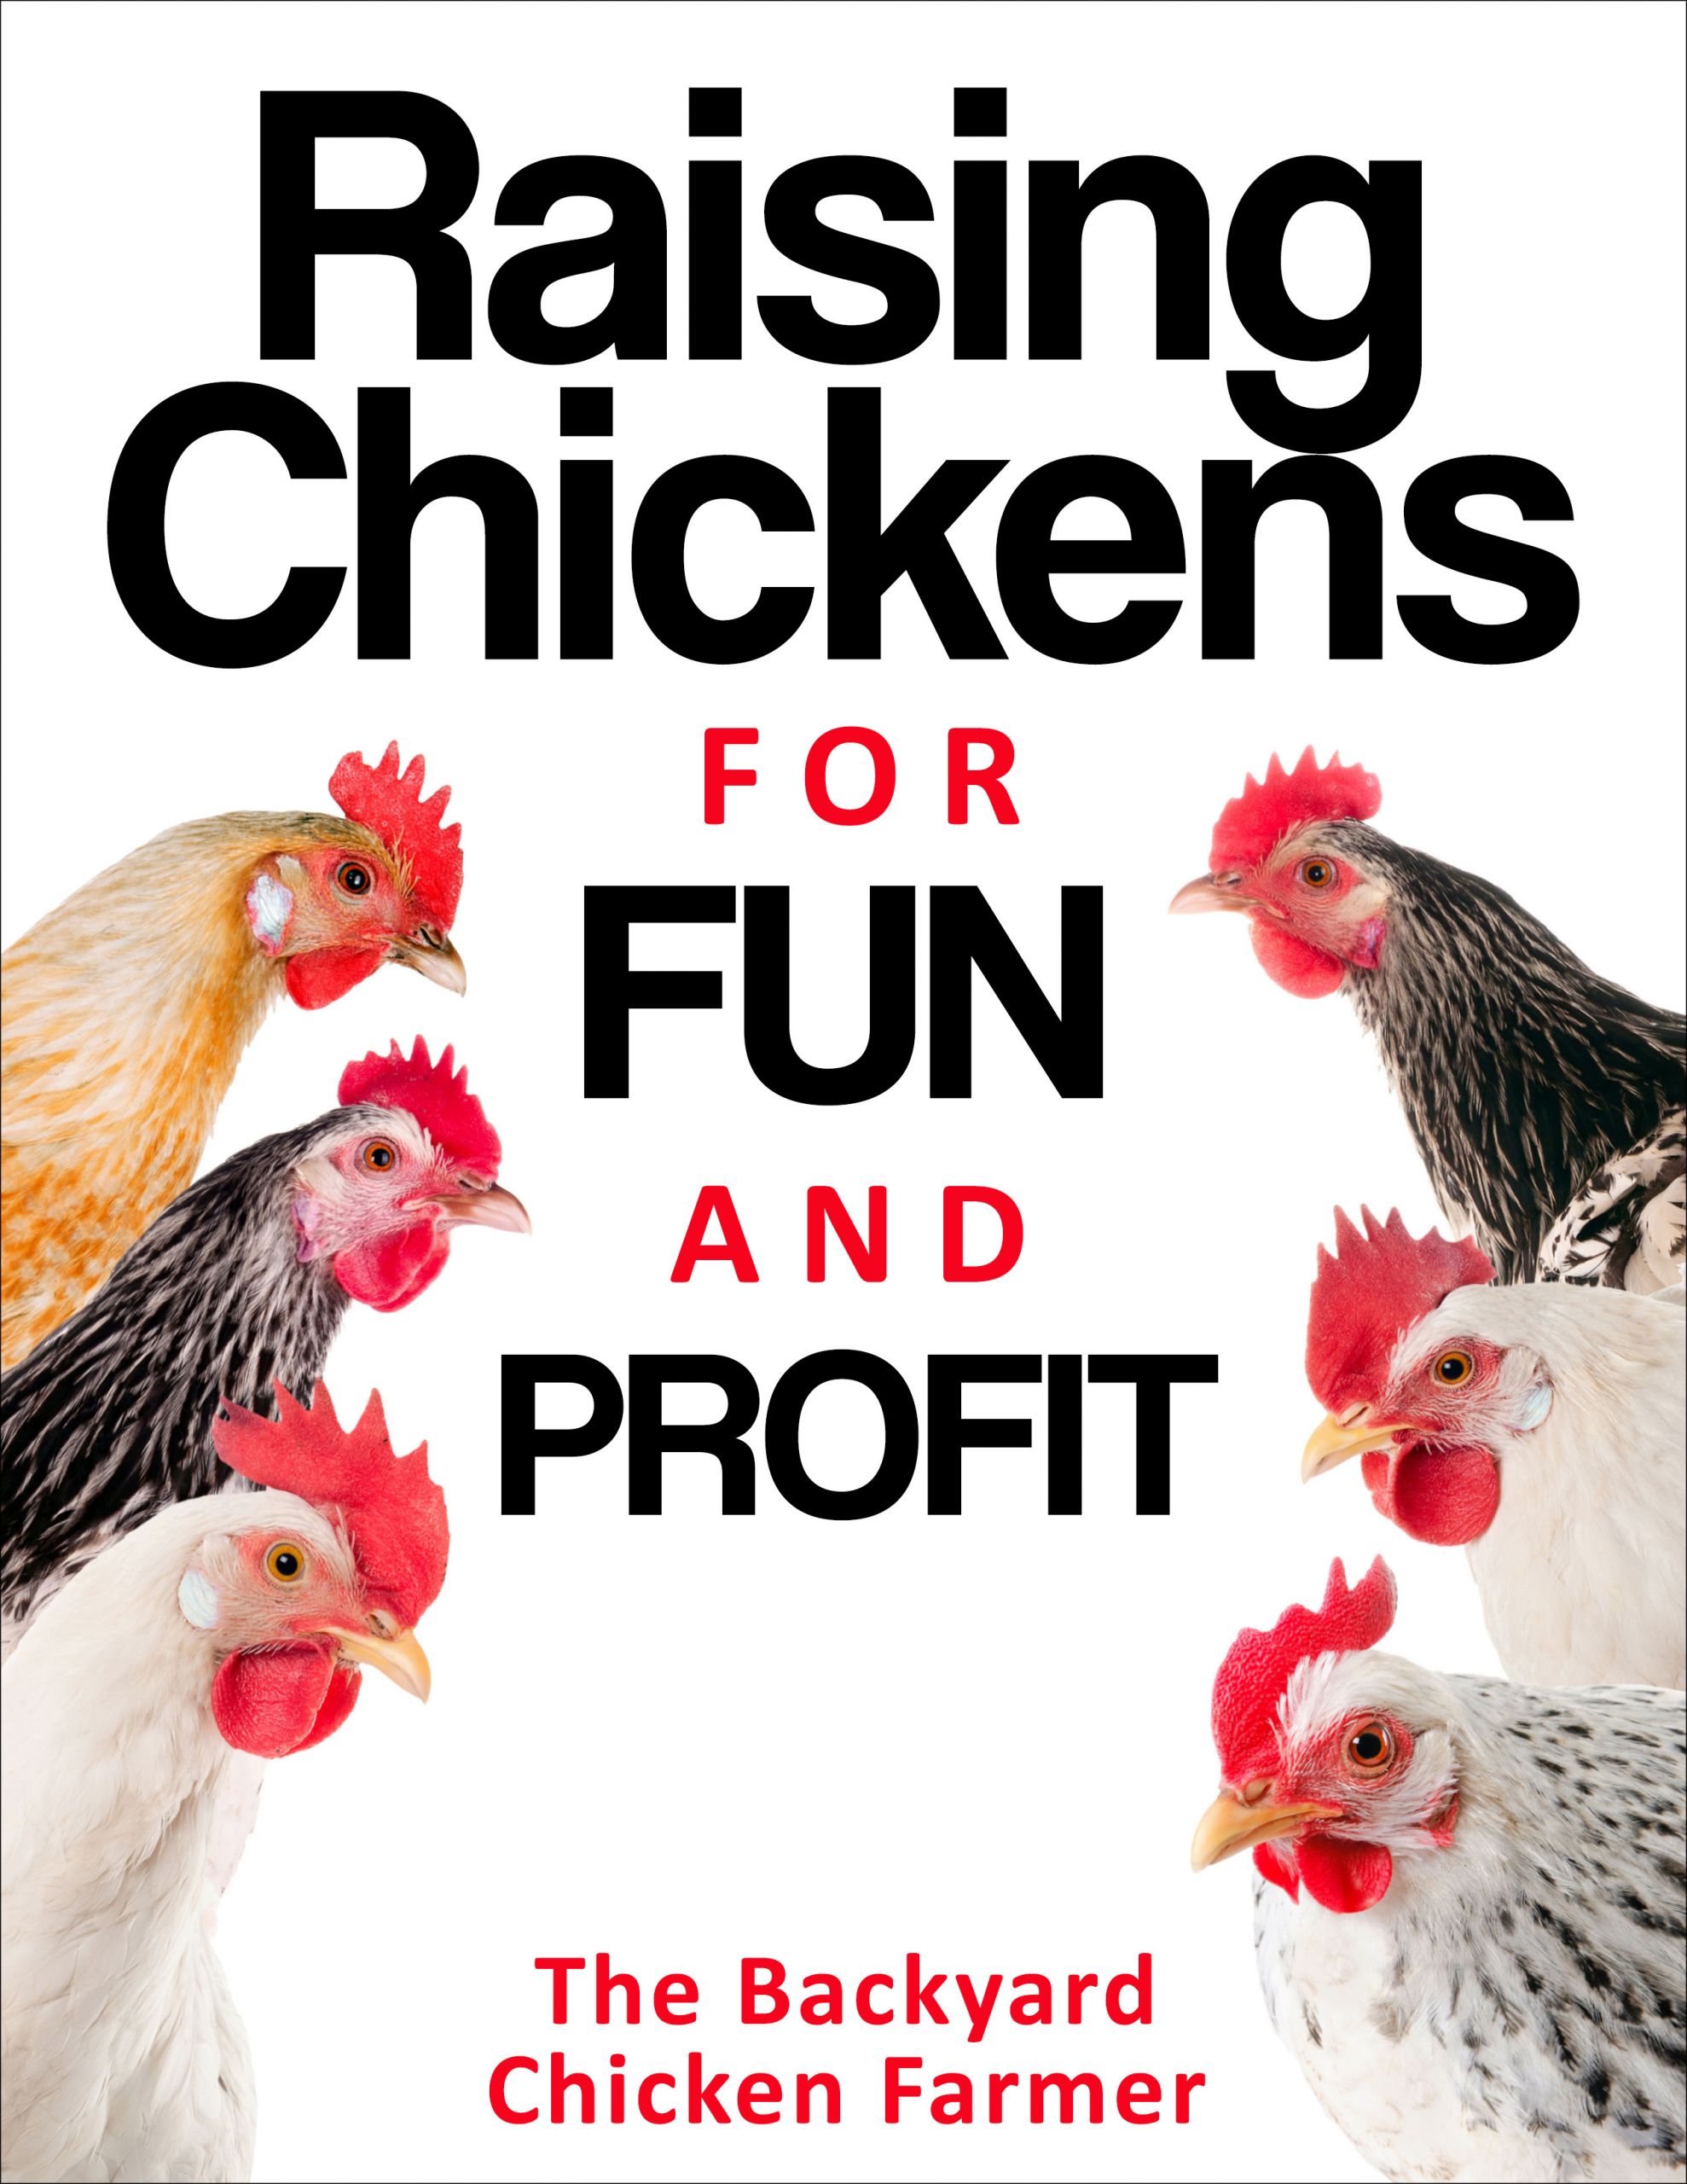 Backyard Chickens Breeds
 Raising Chickens for Fun and Profit The Backyard Chicken